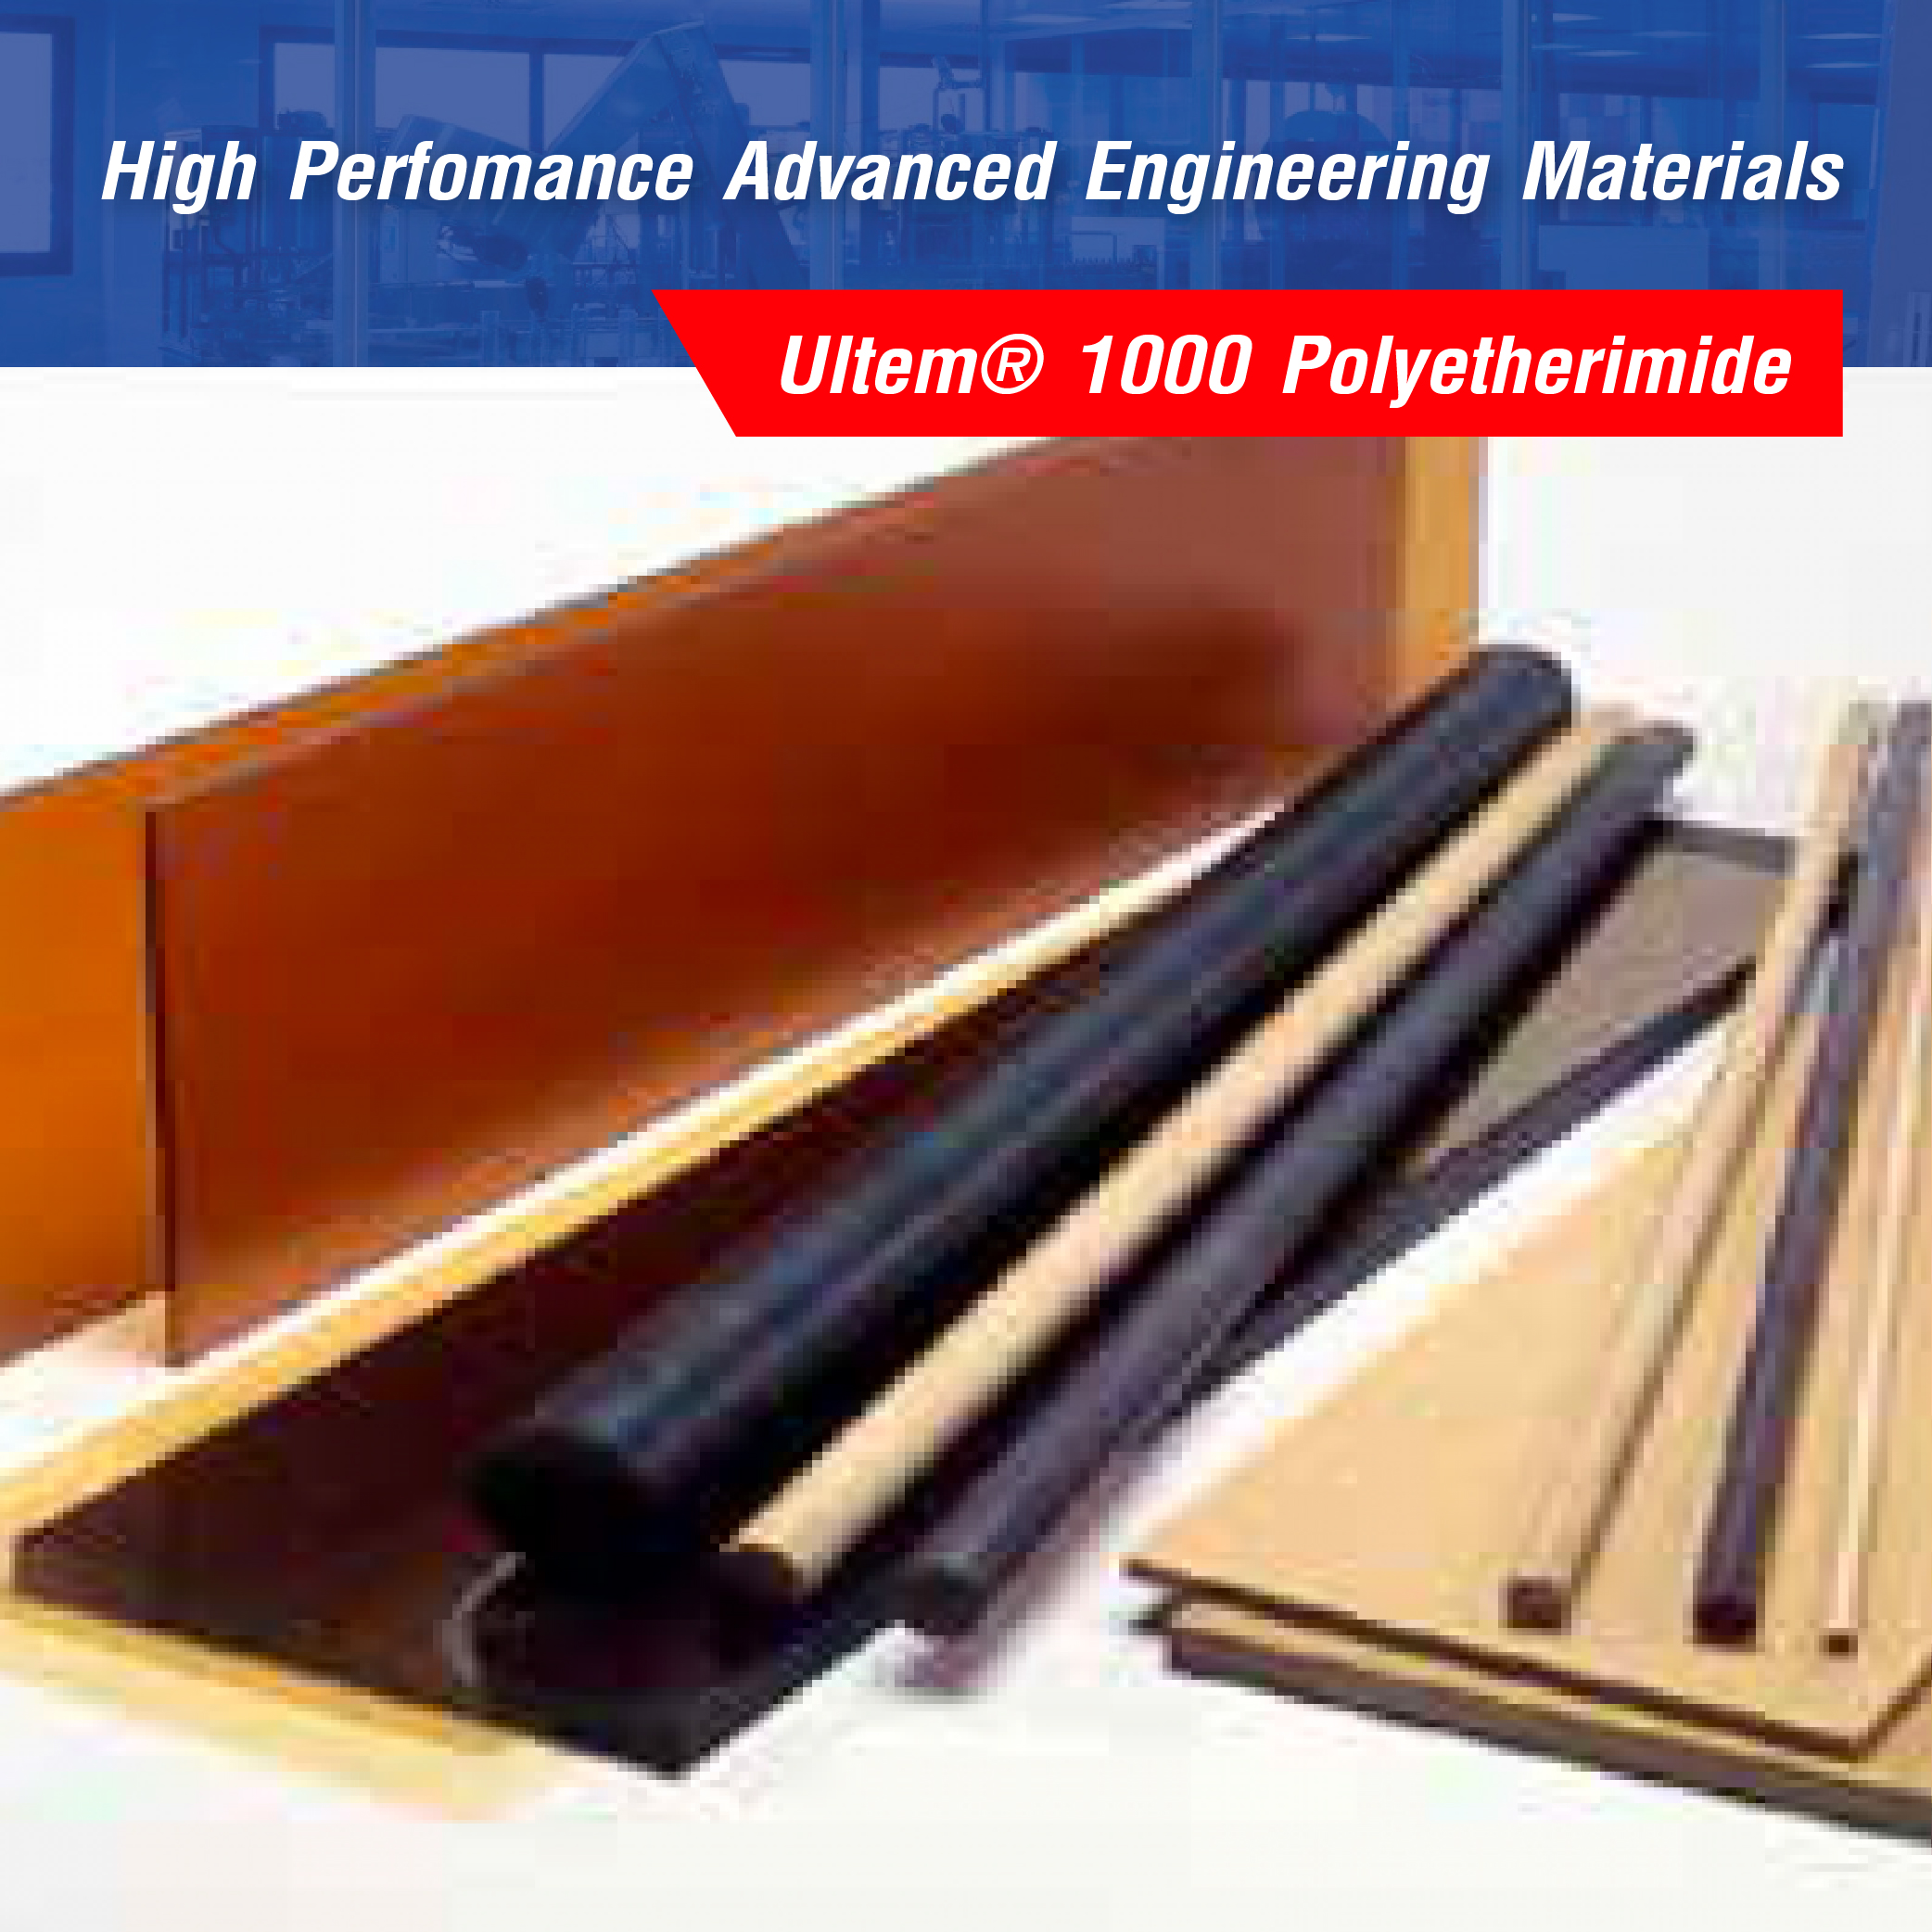 High Perfomance Advanced Engineering Materials